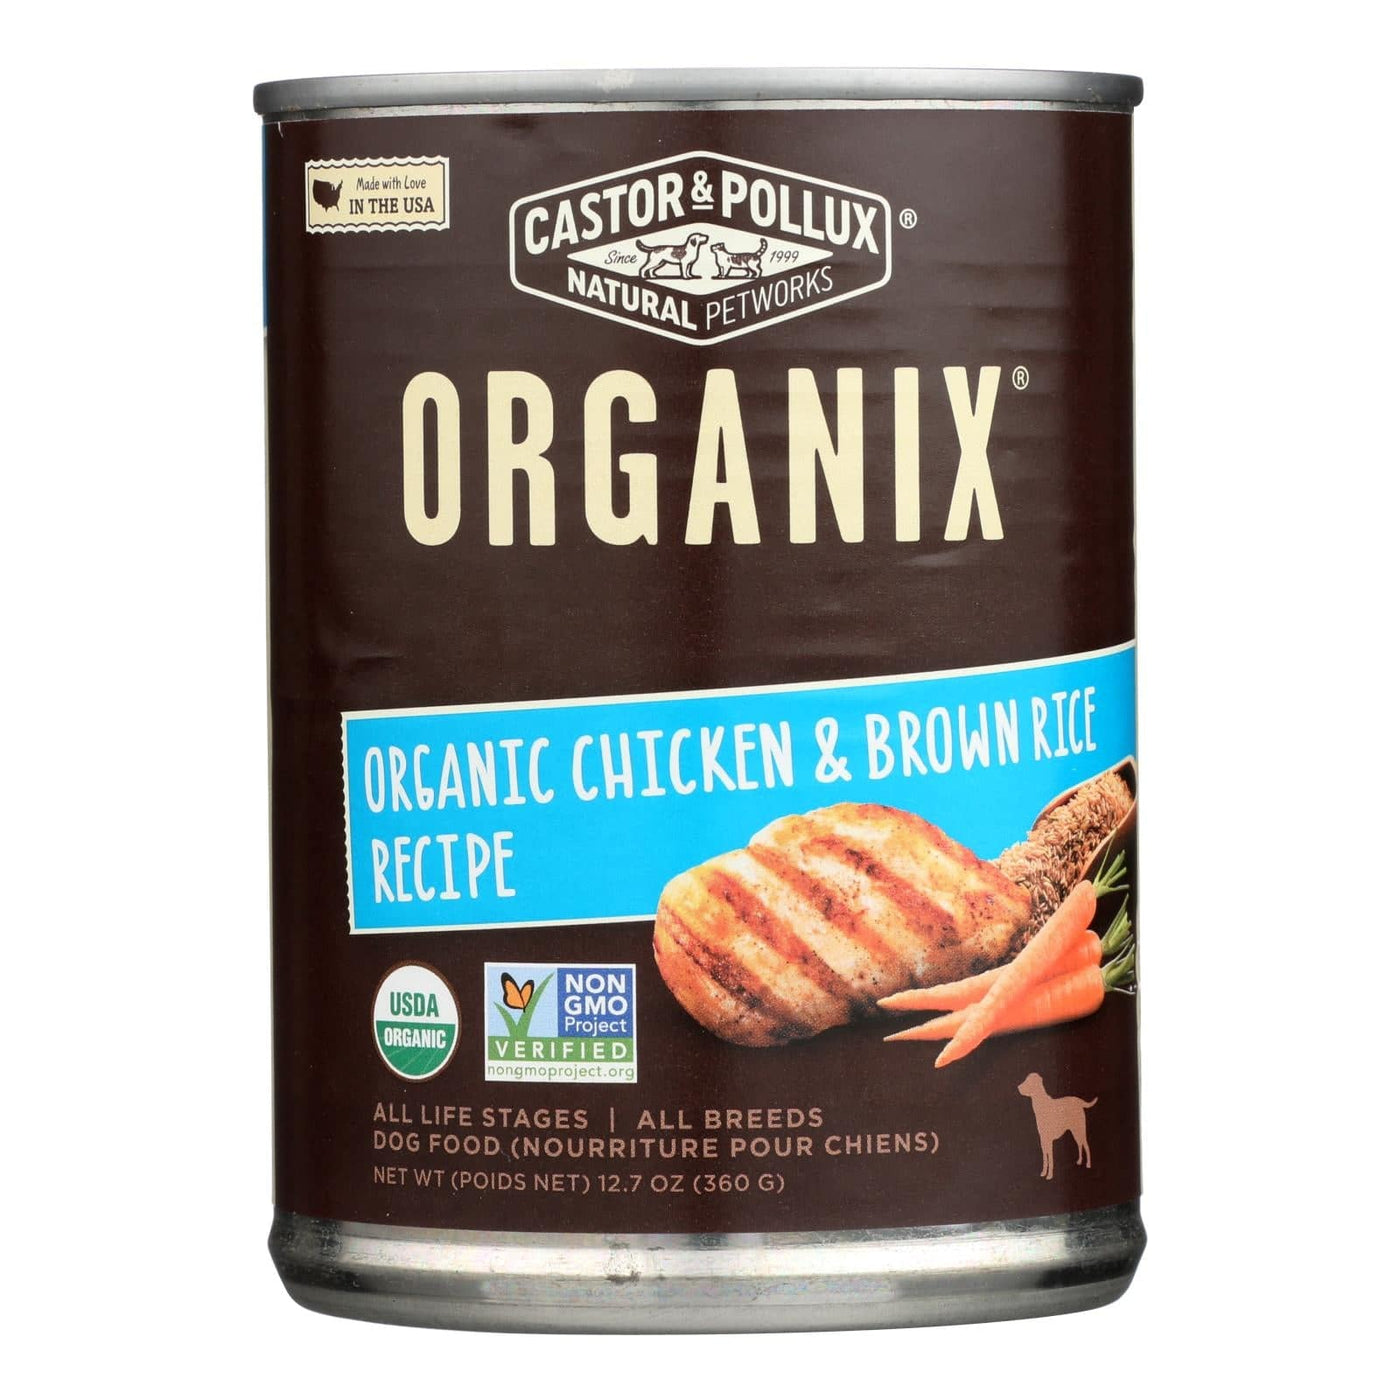 Buy Castor And Pollux Organic Dog Food - Chicken And Brown Rice - Case Of 12 - 12.7 Oz.  at OnlyNaturals.us